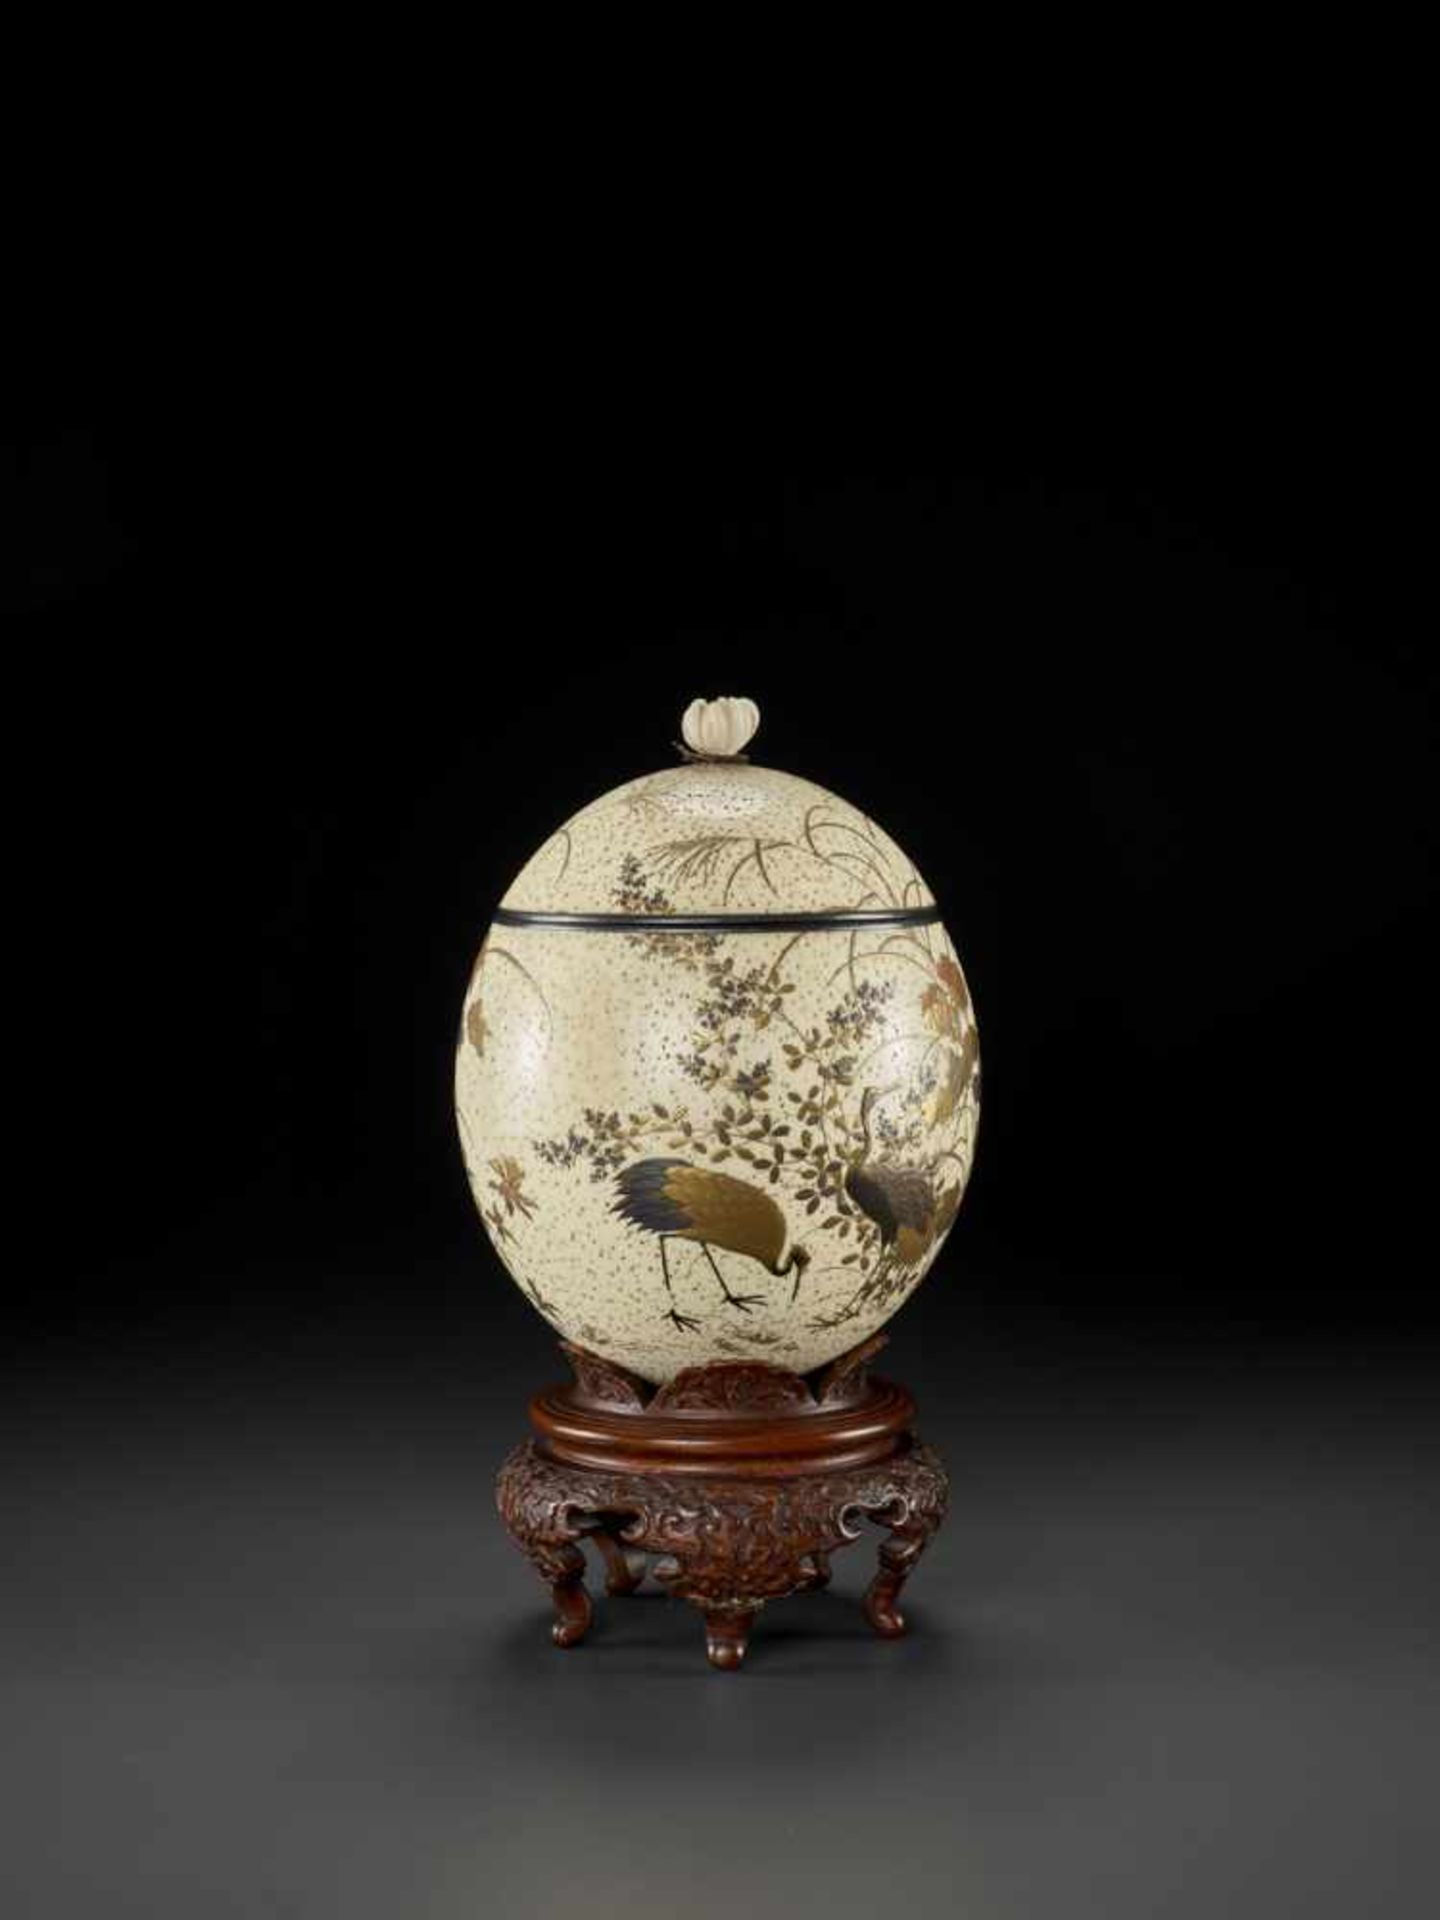 A FINELY LACQUERED OSTRICH EGG Japan, late 19th century, Meiji period (1868-1912)The speckled egg is - Bild 5 aus 10